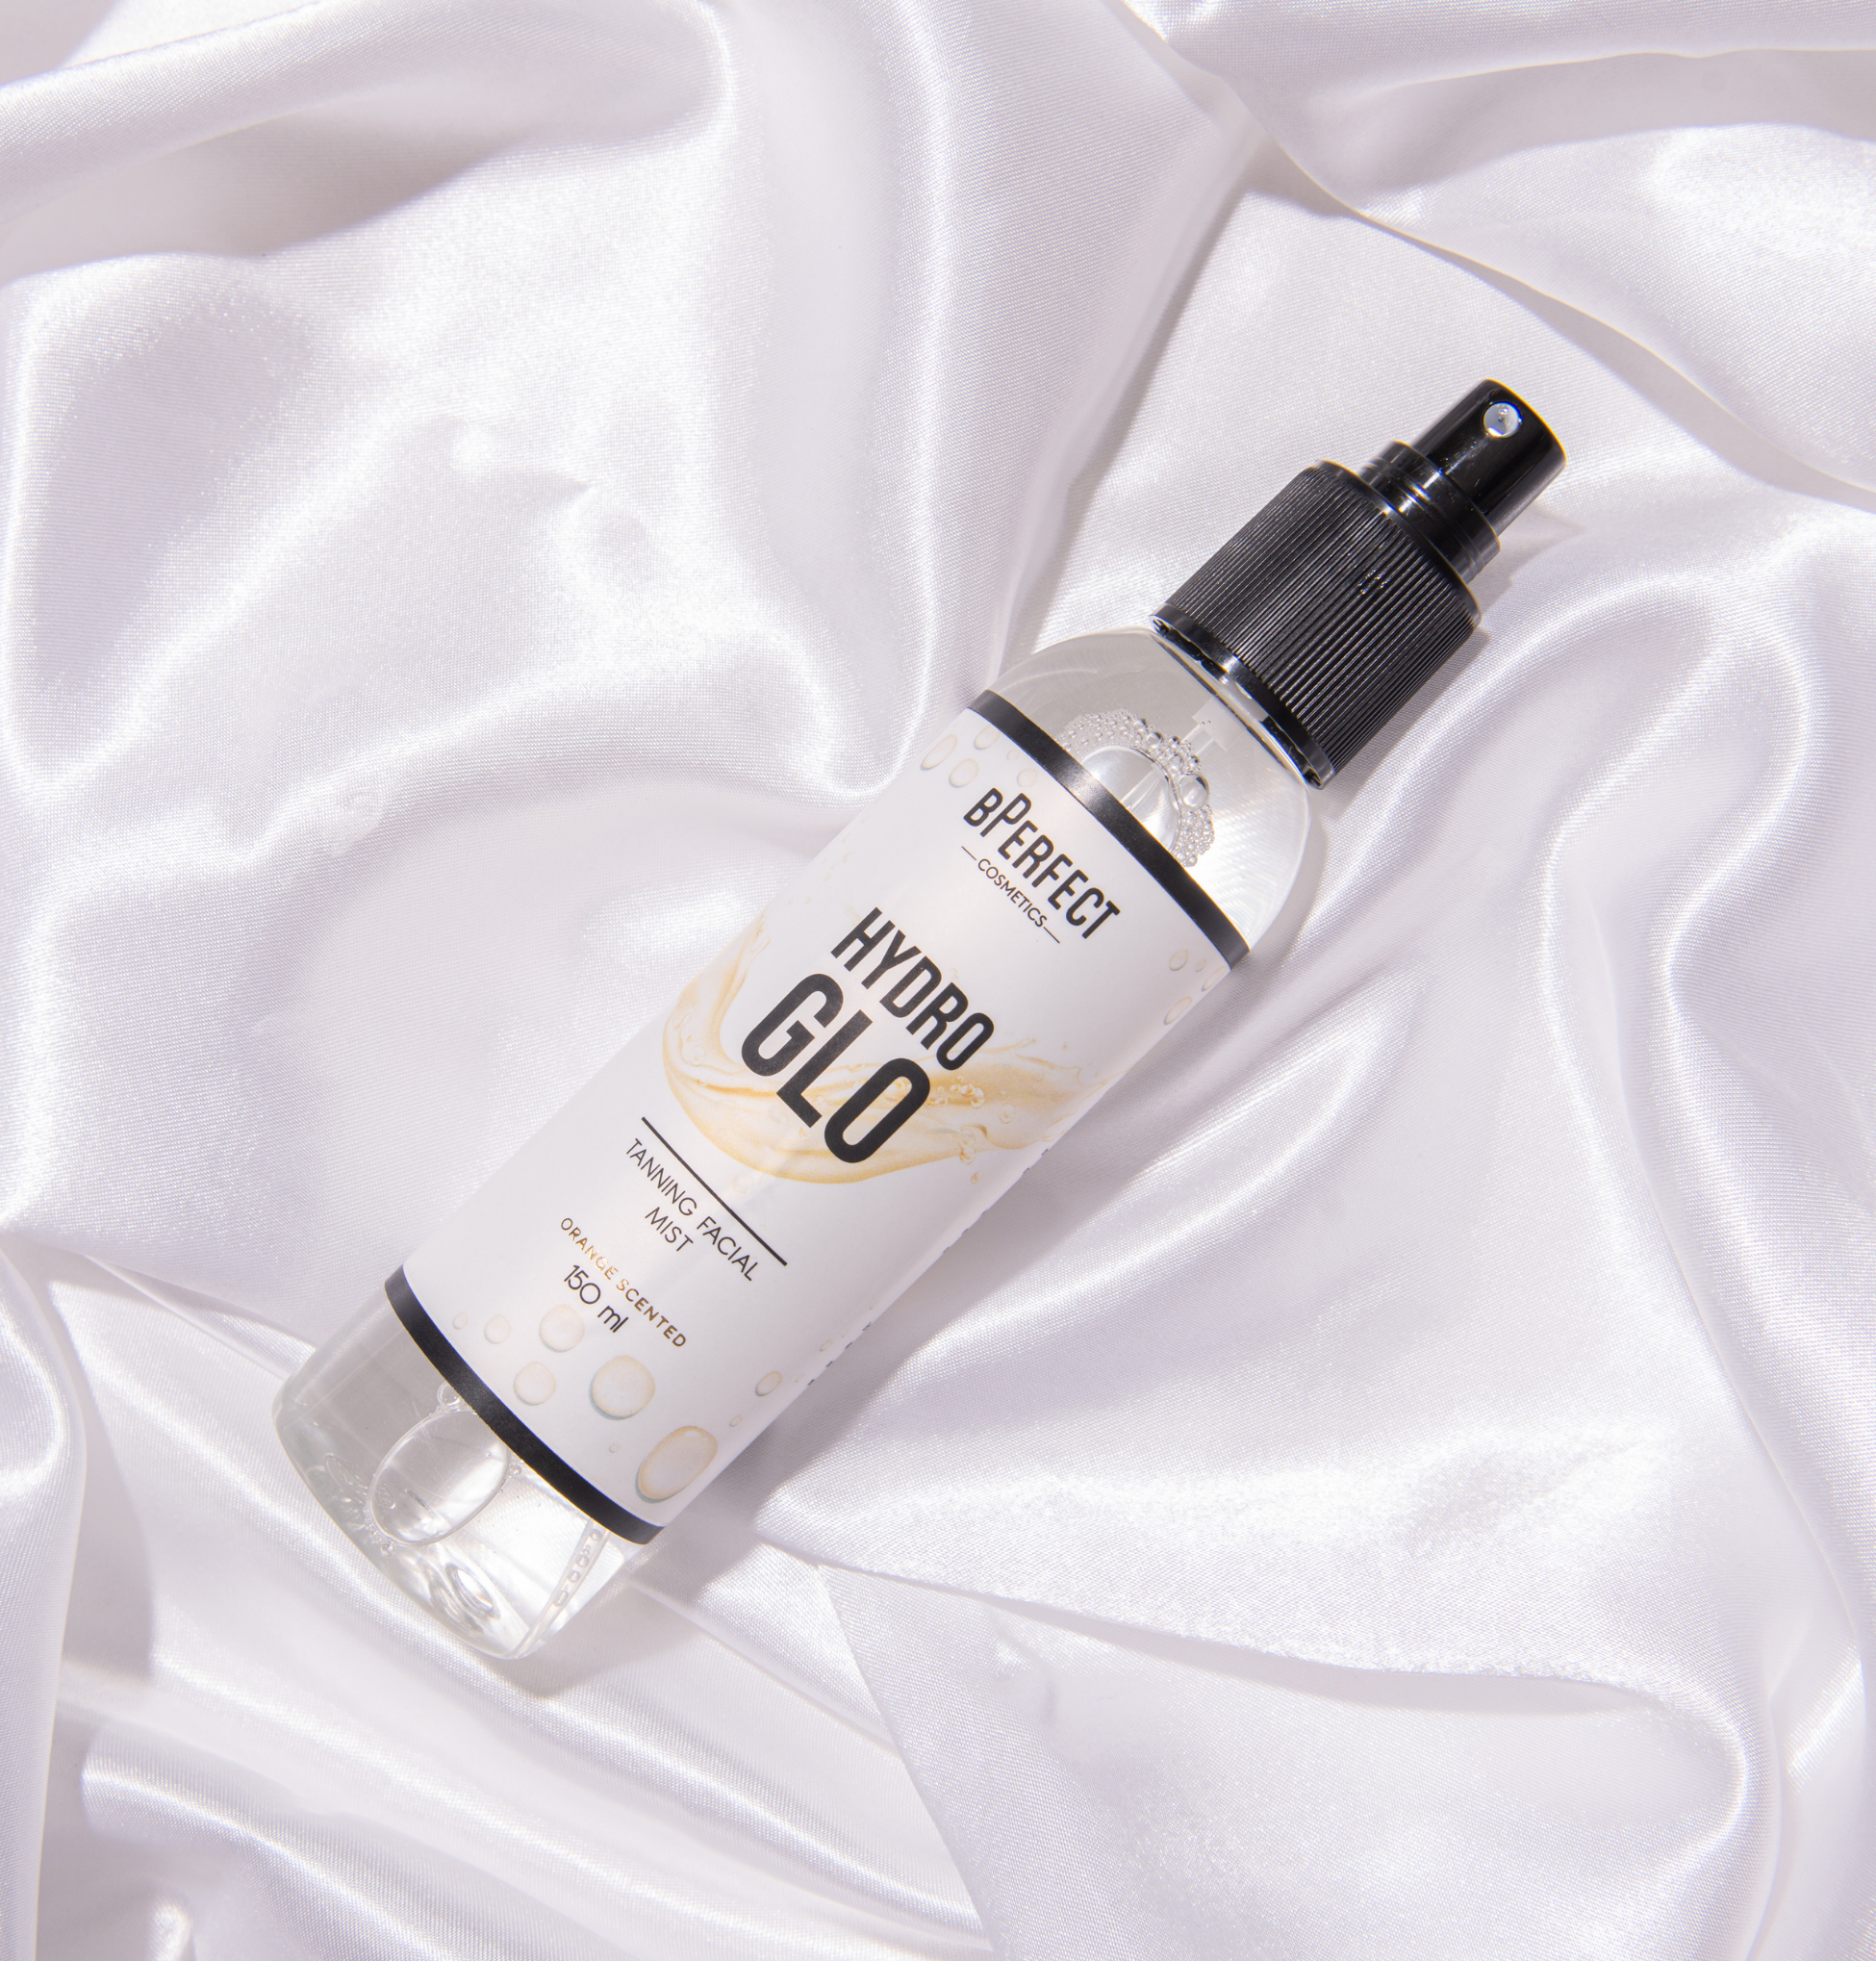 bPerfect HYDRO GLO FACIAL TANNING MIST